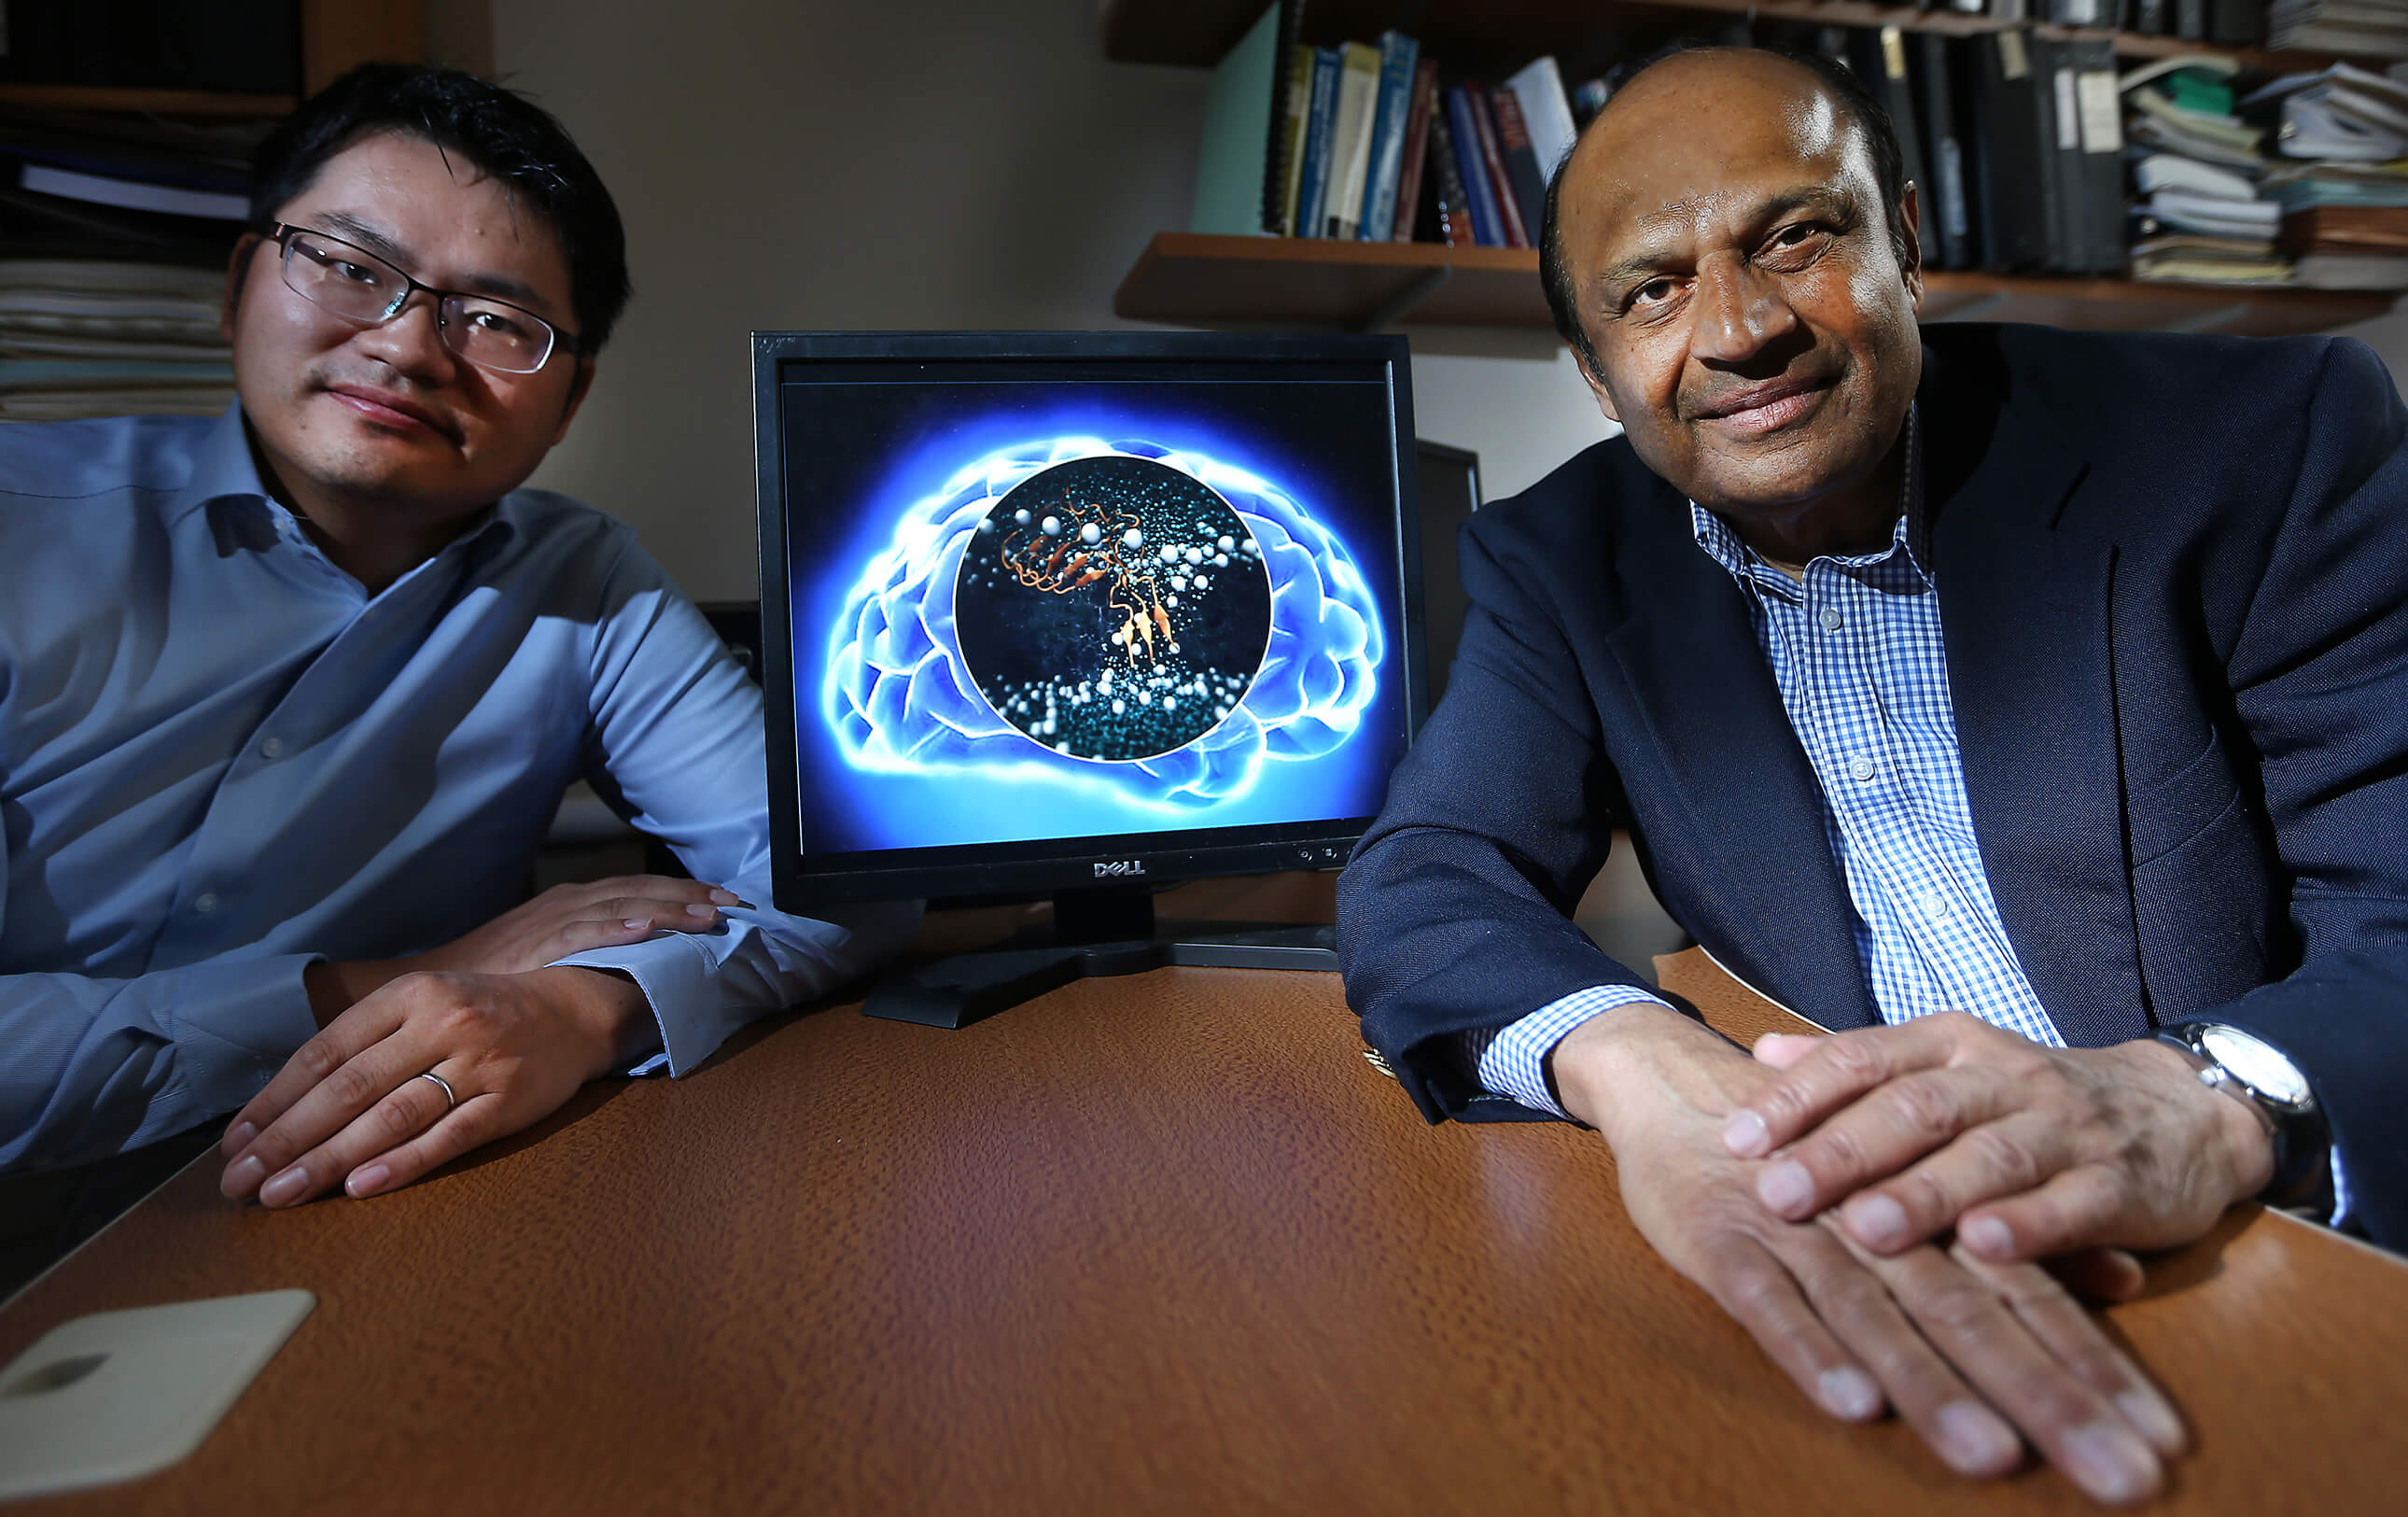 Ganesan Narsimhan (right) and Xiao Zhu simulated the effect beta-amyloid peptides have on neural cells, showing what may be the role these substances have in causing brain cell death and some neurodegenerative diseases, such as Alzheimer’s disease. (Purdue Ag Communication photo/Tom Campbell). 